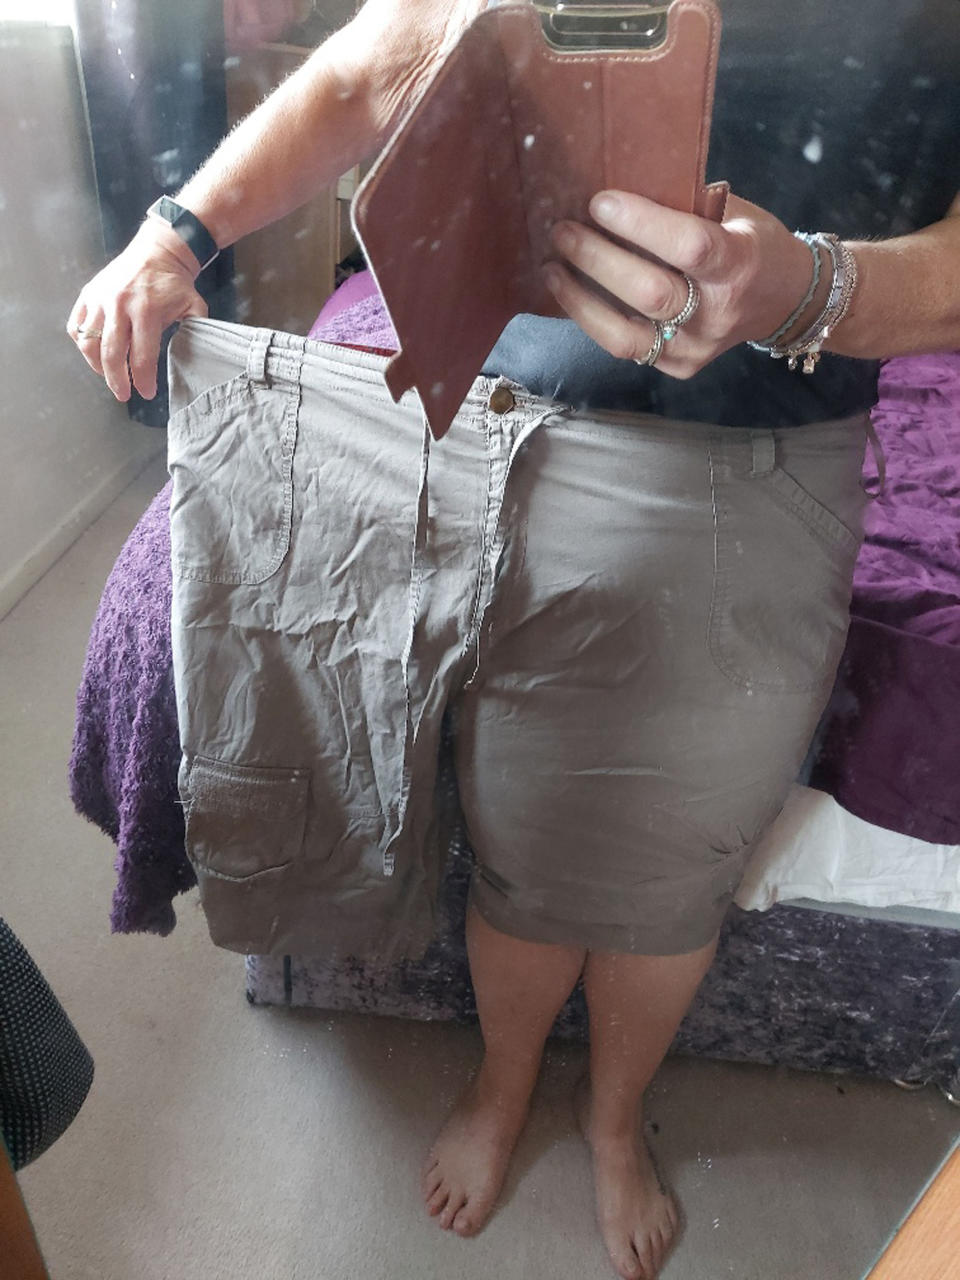 Tracey Hewitt showing how big her trousers are for her now after weight loss. (Caters)